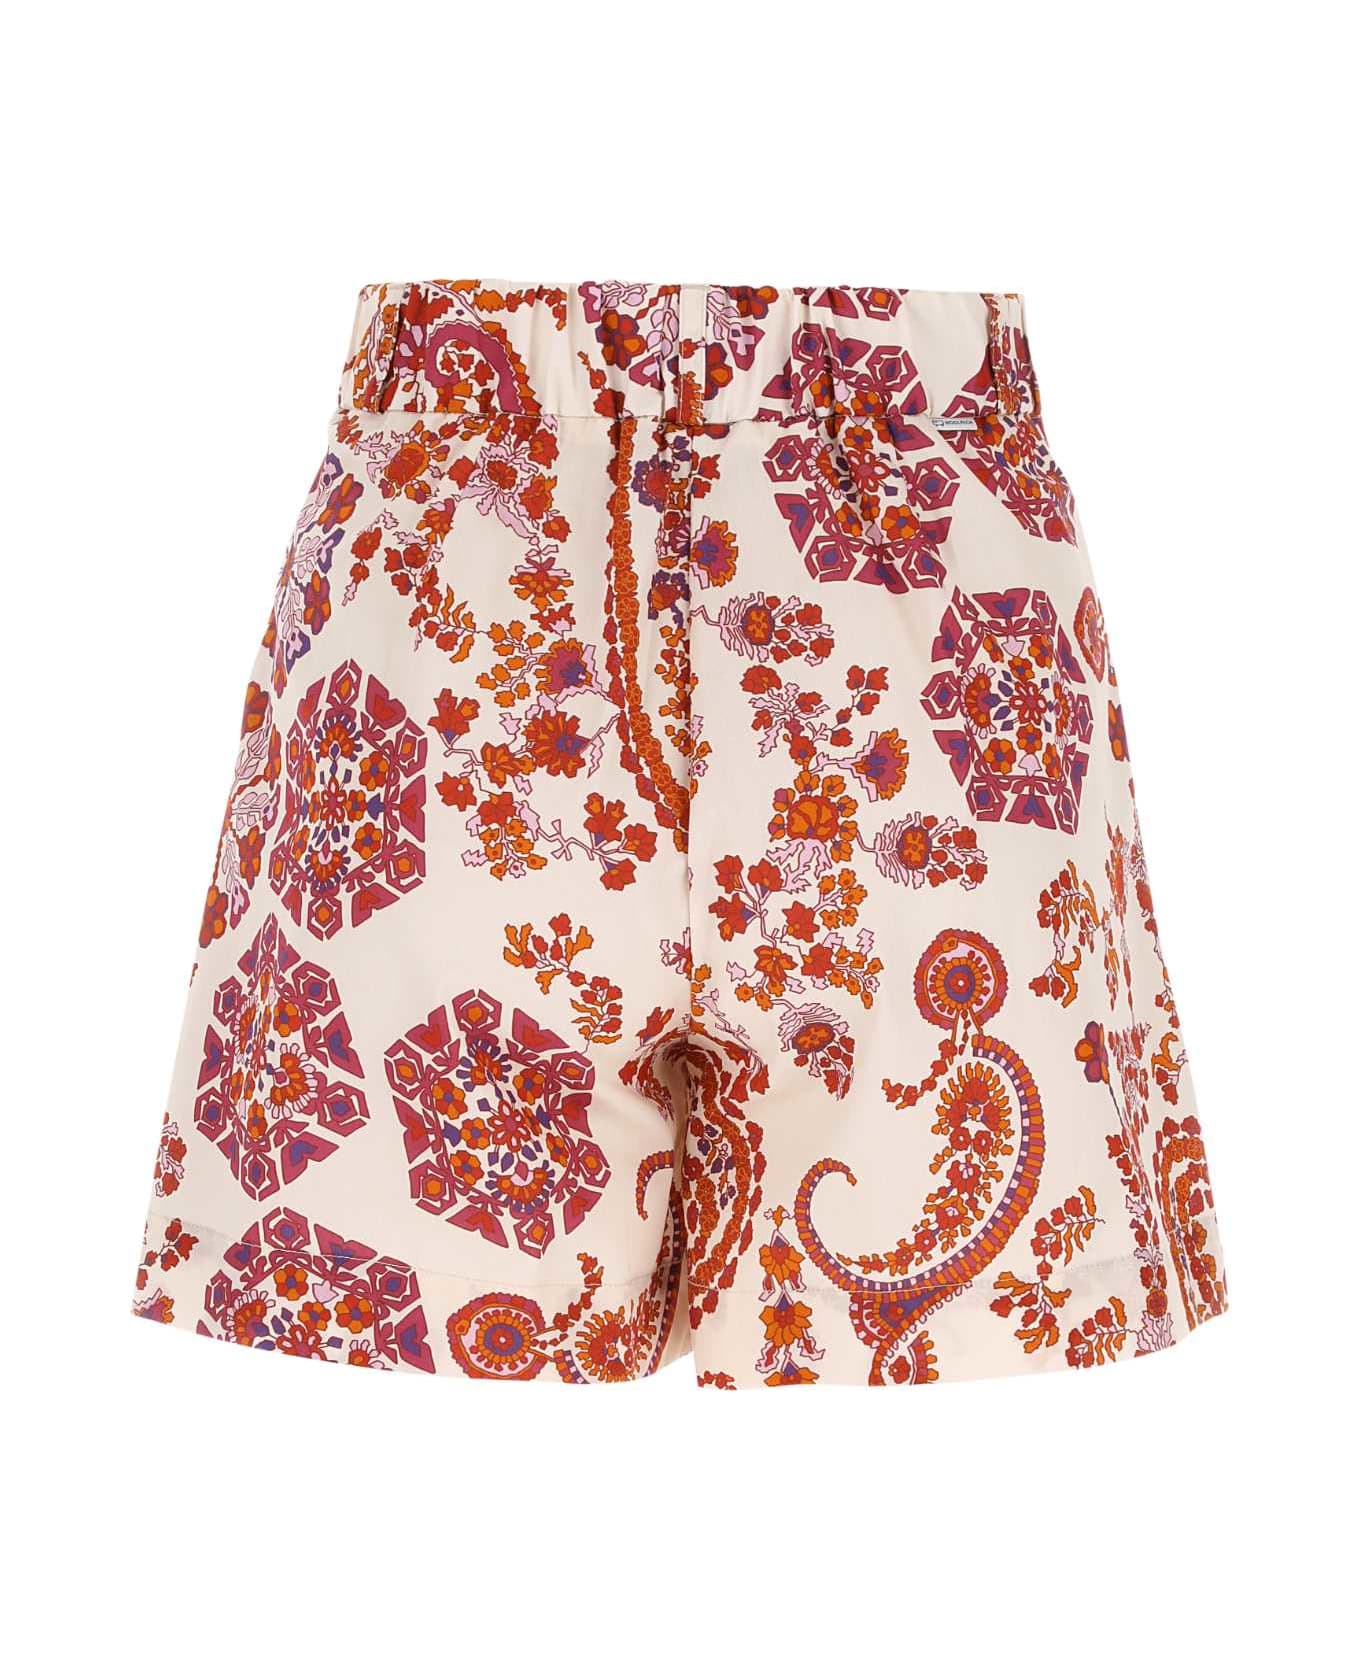 Woolrich Printed Cotton Shorts - 5490 ショートパンツ